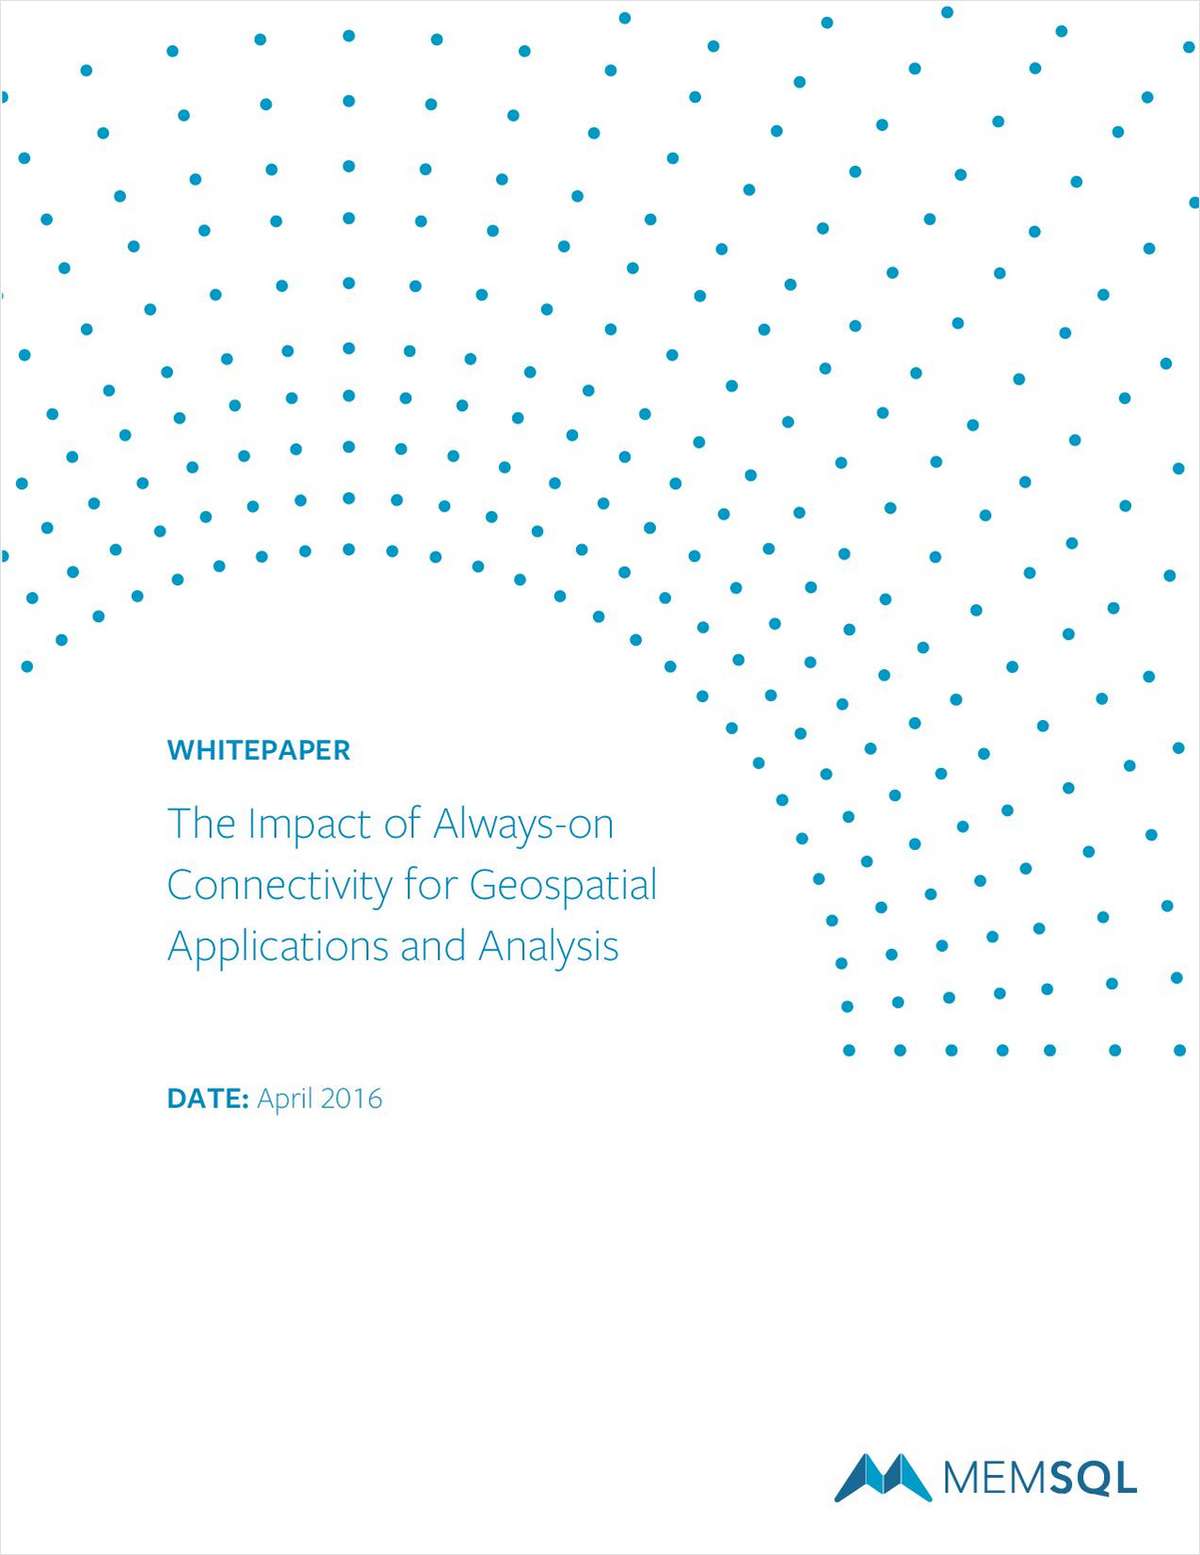 The Impact of Always-on Connectivity for Geospatial Applications and Analysis